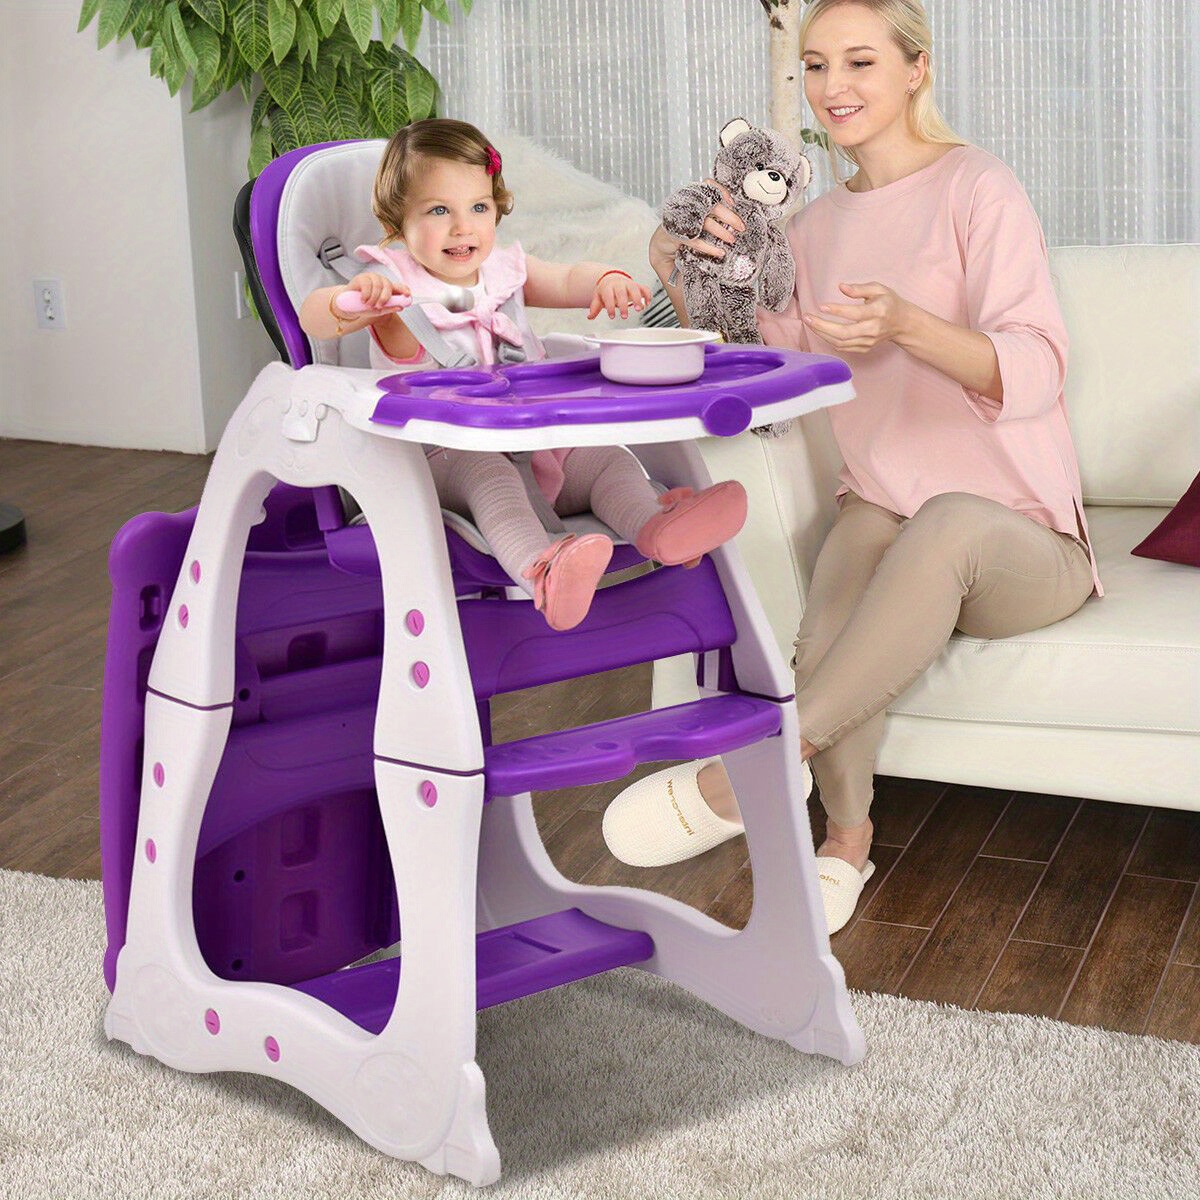 

Safstar 3 In 1 Baby High Chair Convertible Play Table Seat Booster Toddler Baby Tray